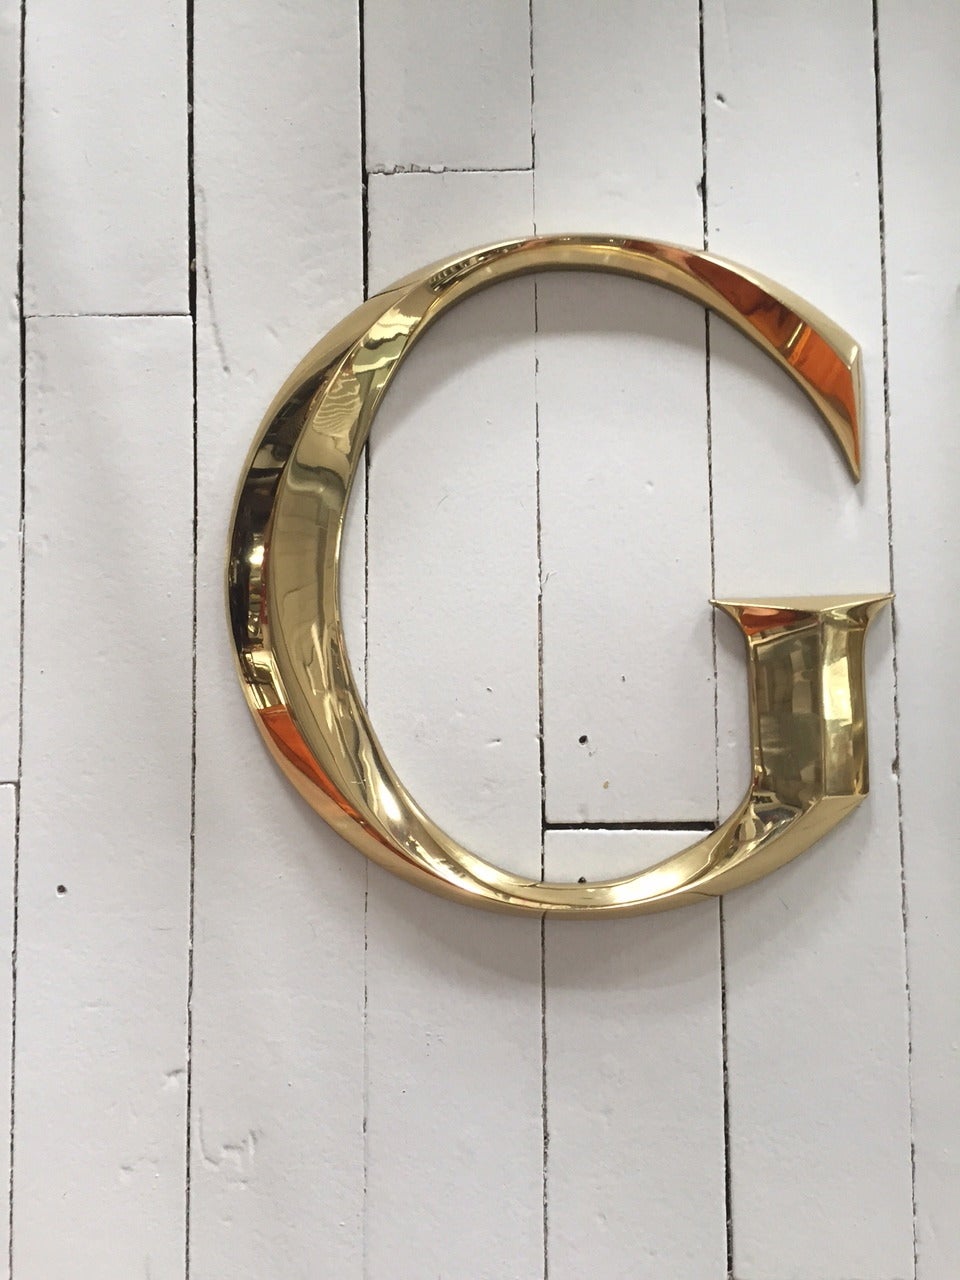 Solid brass letters that spell Gucci ; from one of their retail stores.
Each letter has holes to allow for mounting.